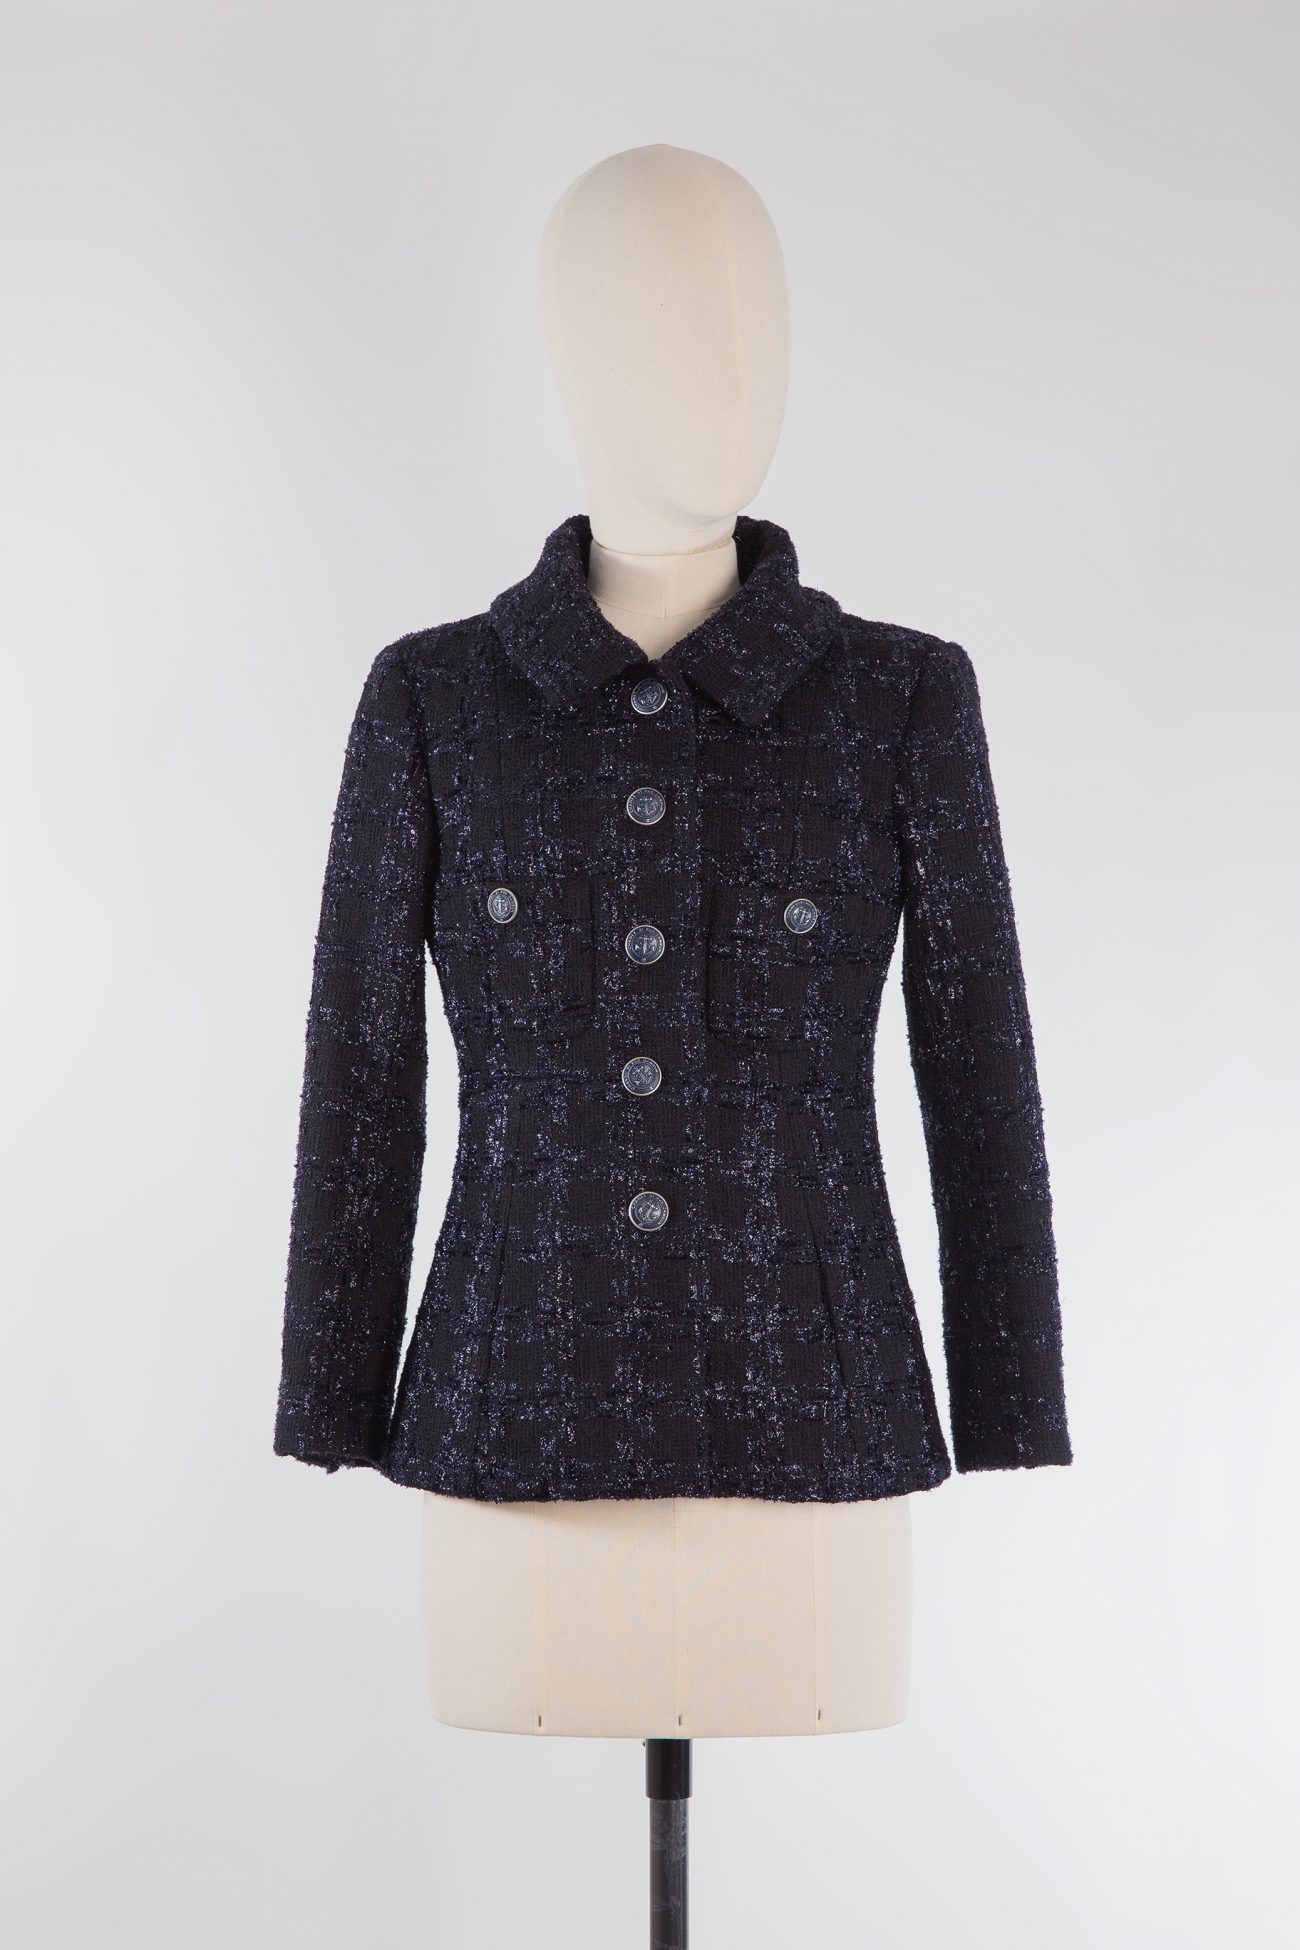 Chanel Jacket, FR34 - Huntessa Luxury Online Consignment Boutique